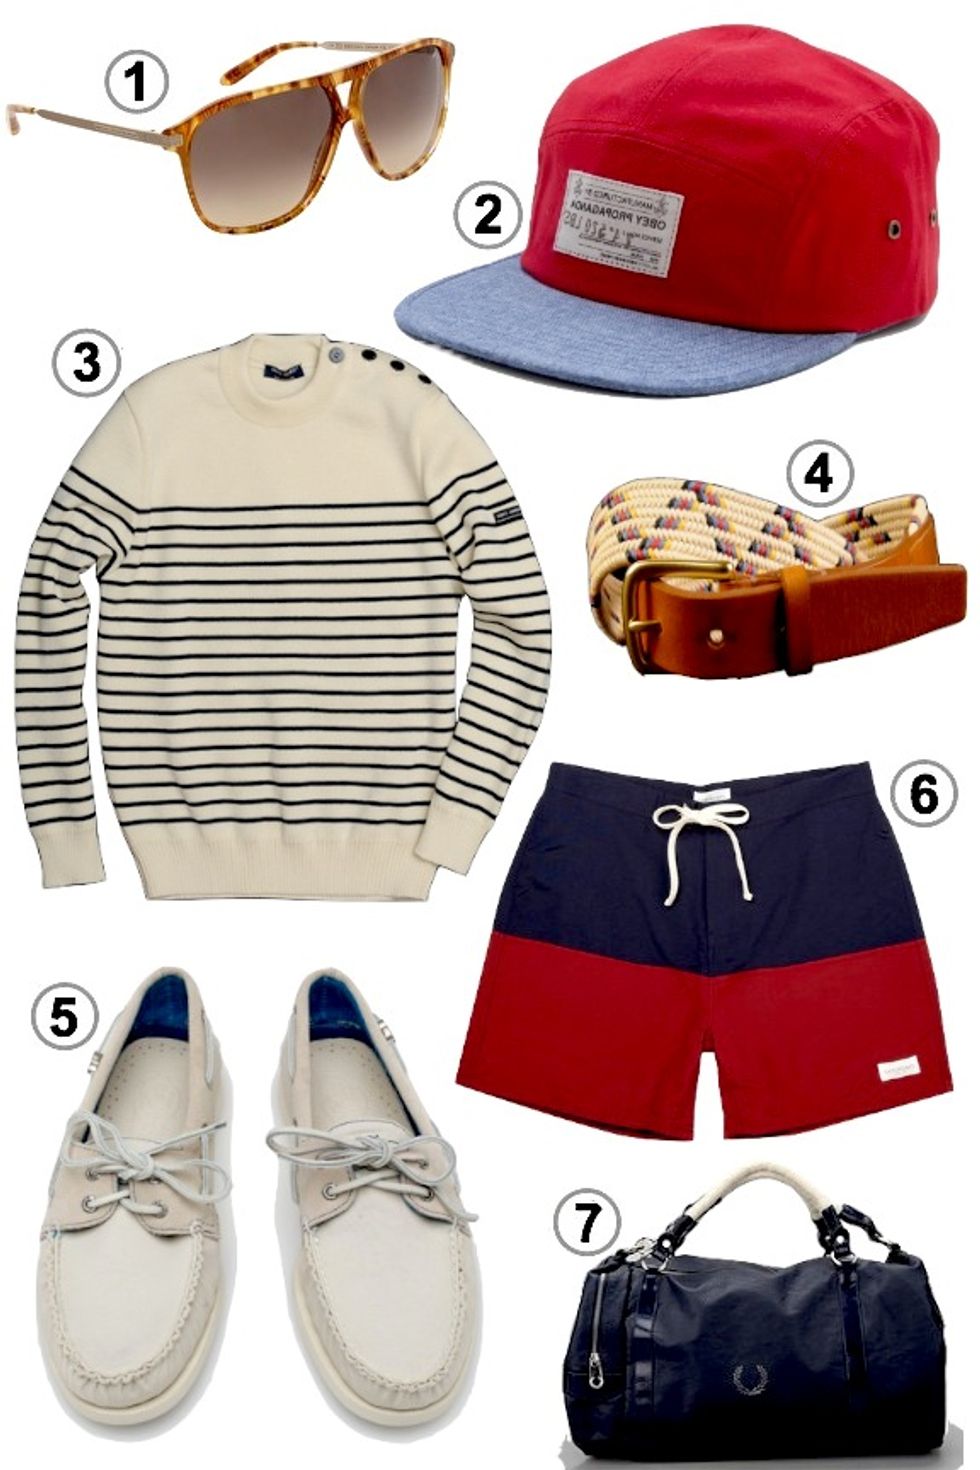 Look of the Week: Hey There, Sailor